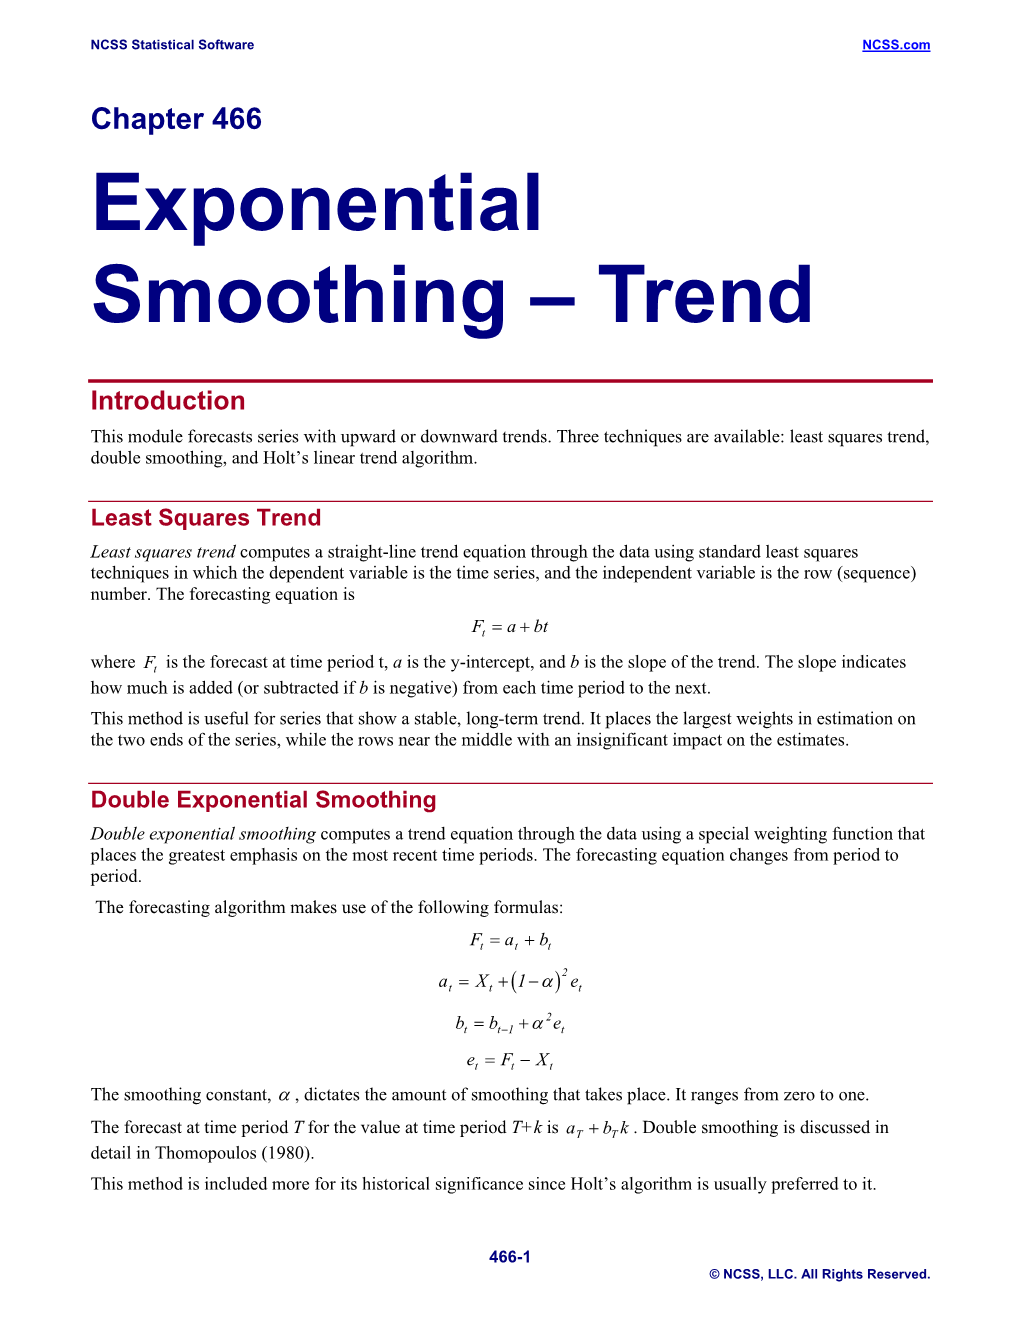 Exponential Smoothing – Trend